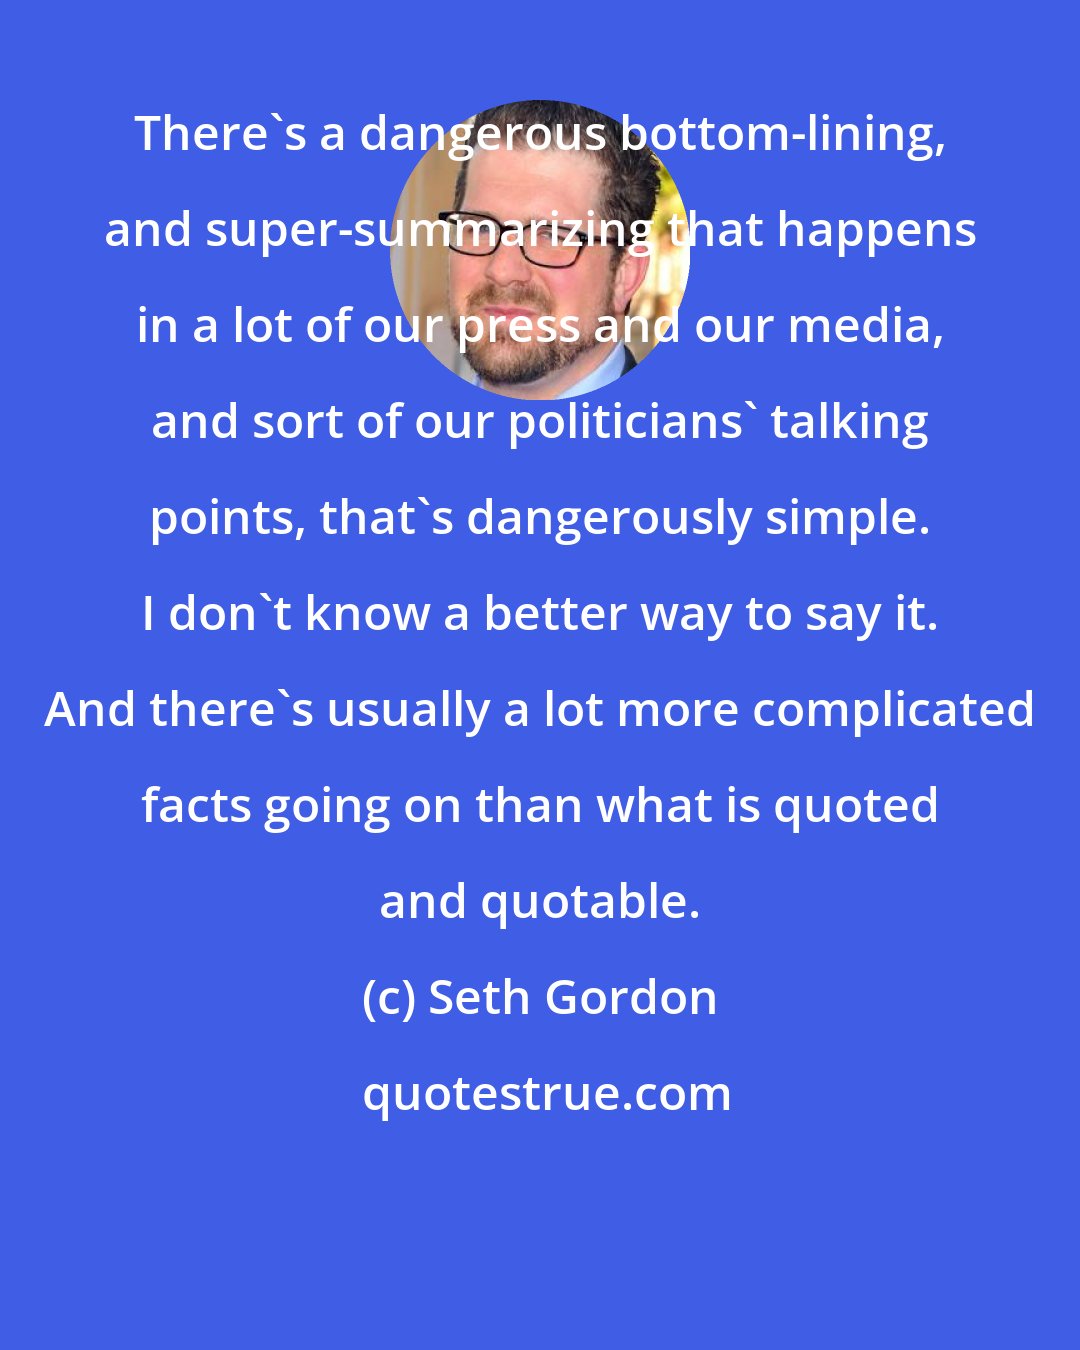 Seth Gordon: There's a dangerous bottom-lining, and super-summarizing that happens in a lot of our press and our media, and sort of our politicians' talking points, that's dangerously simple. I don't know a better way to say it. And there's usually a lot more complicated facts going on than what is quoted and quotable.